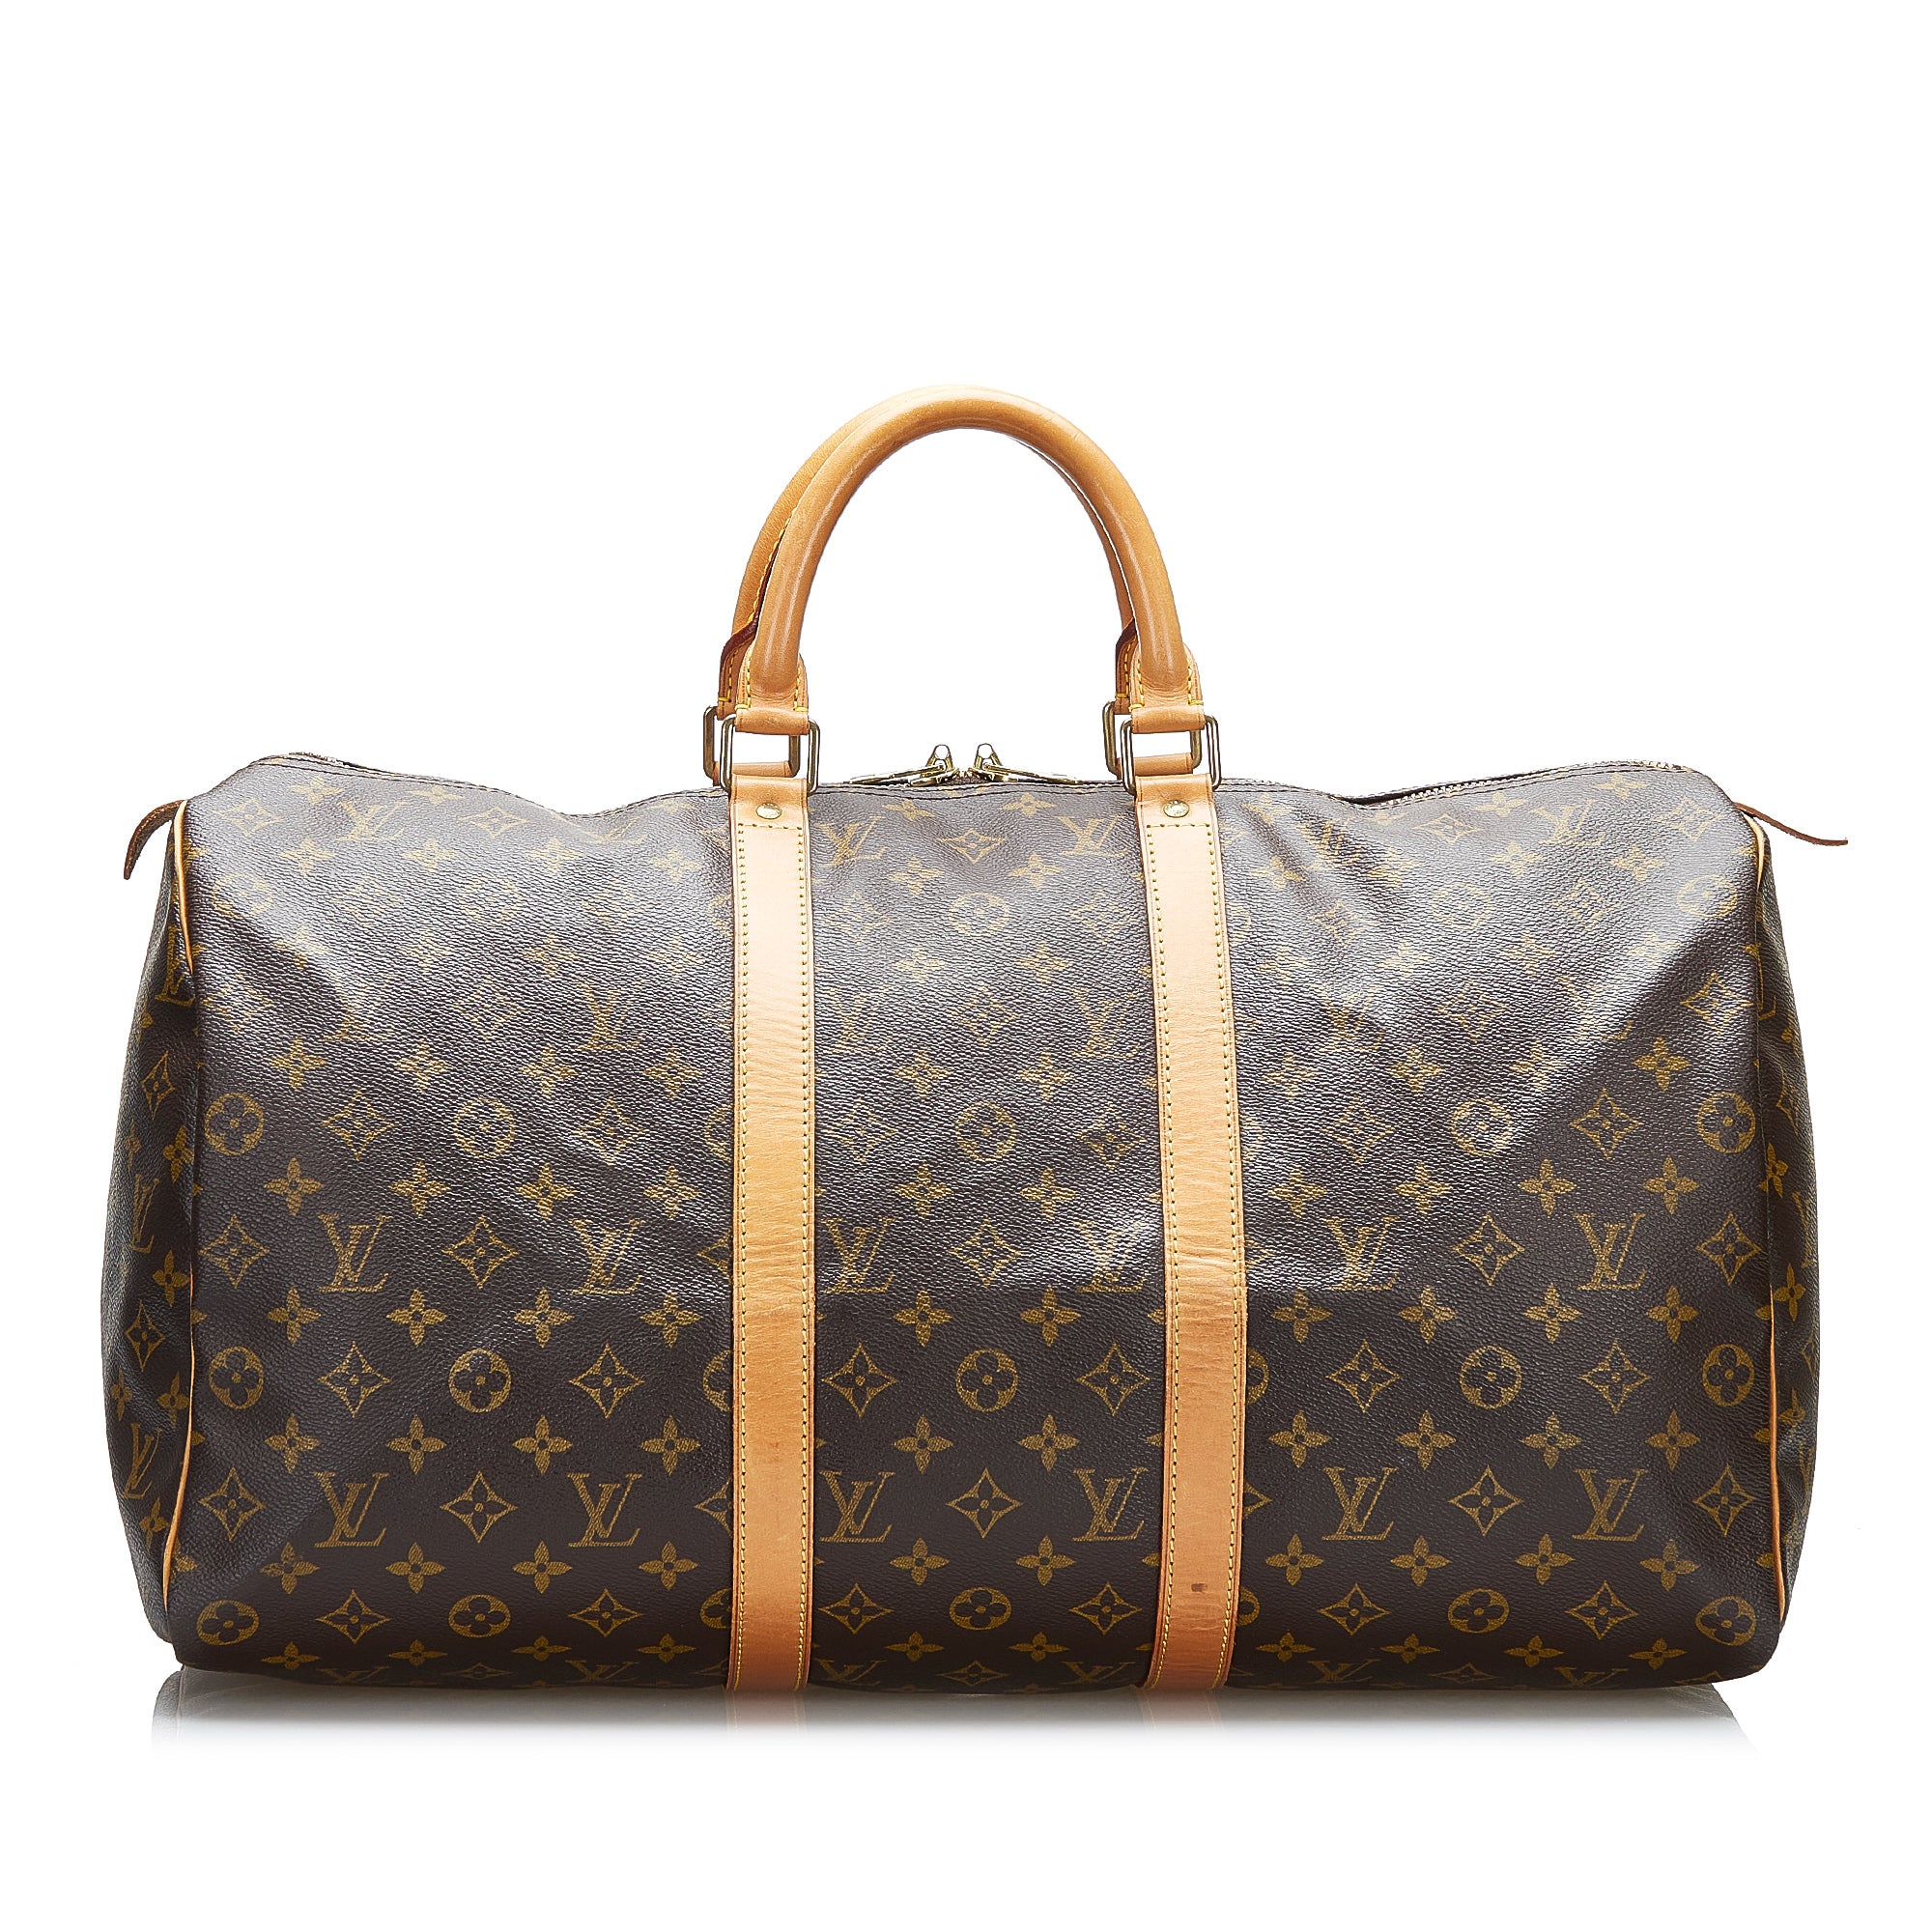 LOUIS VUITTON KEEPALL 50 TRAVEL BAG, monogram canvas with full top